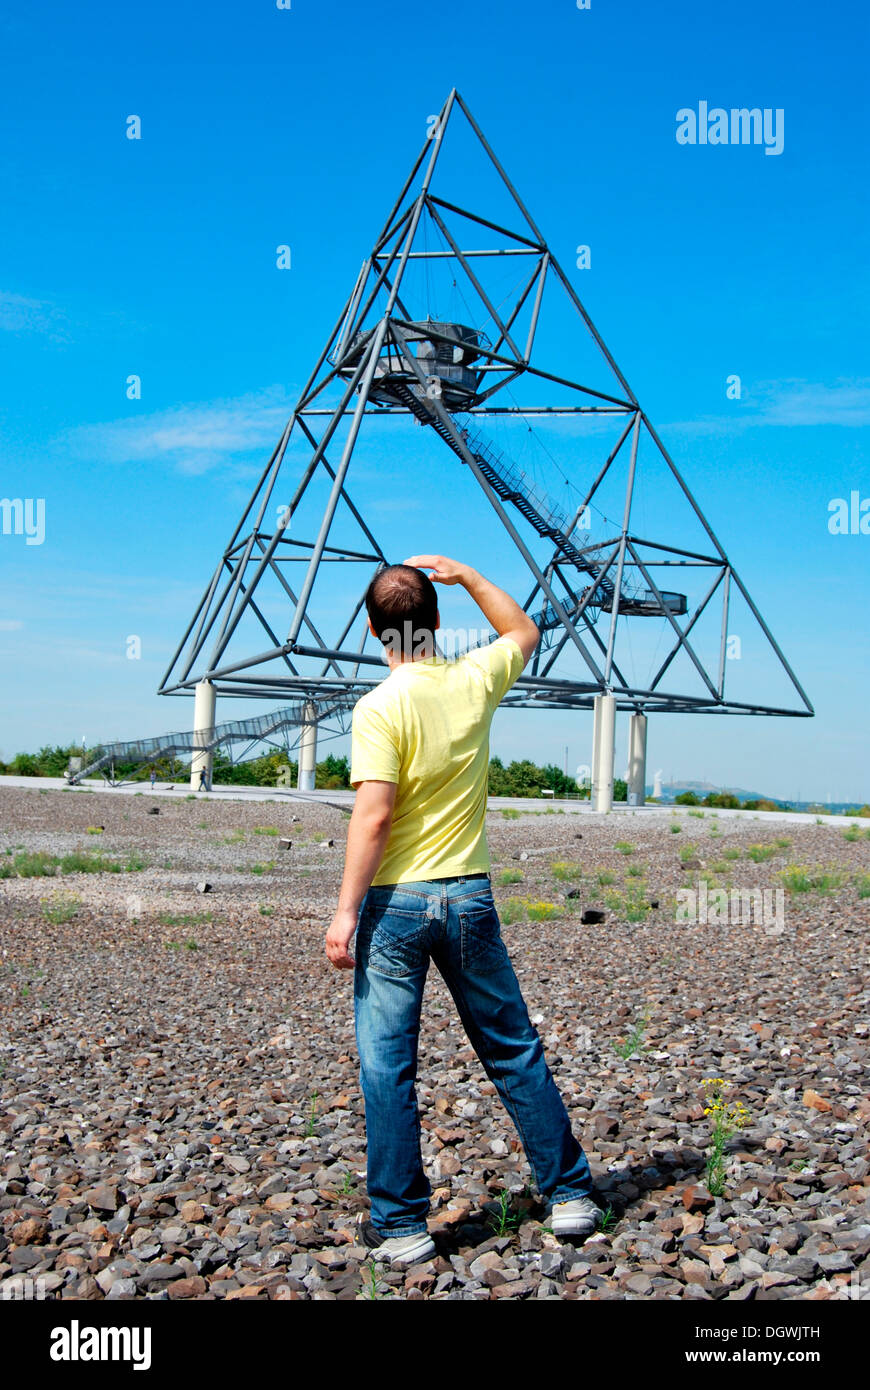 Young man standing in front of the Tetraeder landmark, a tetrahedron made from steel, industrial heritage Stock Photo